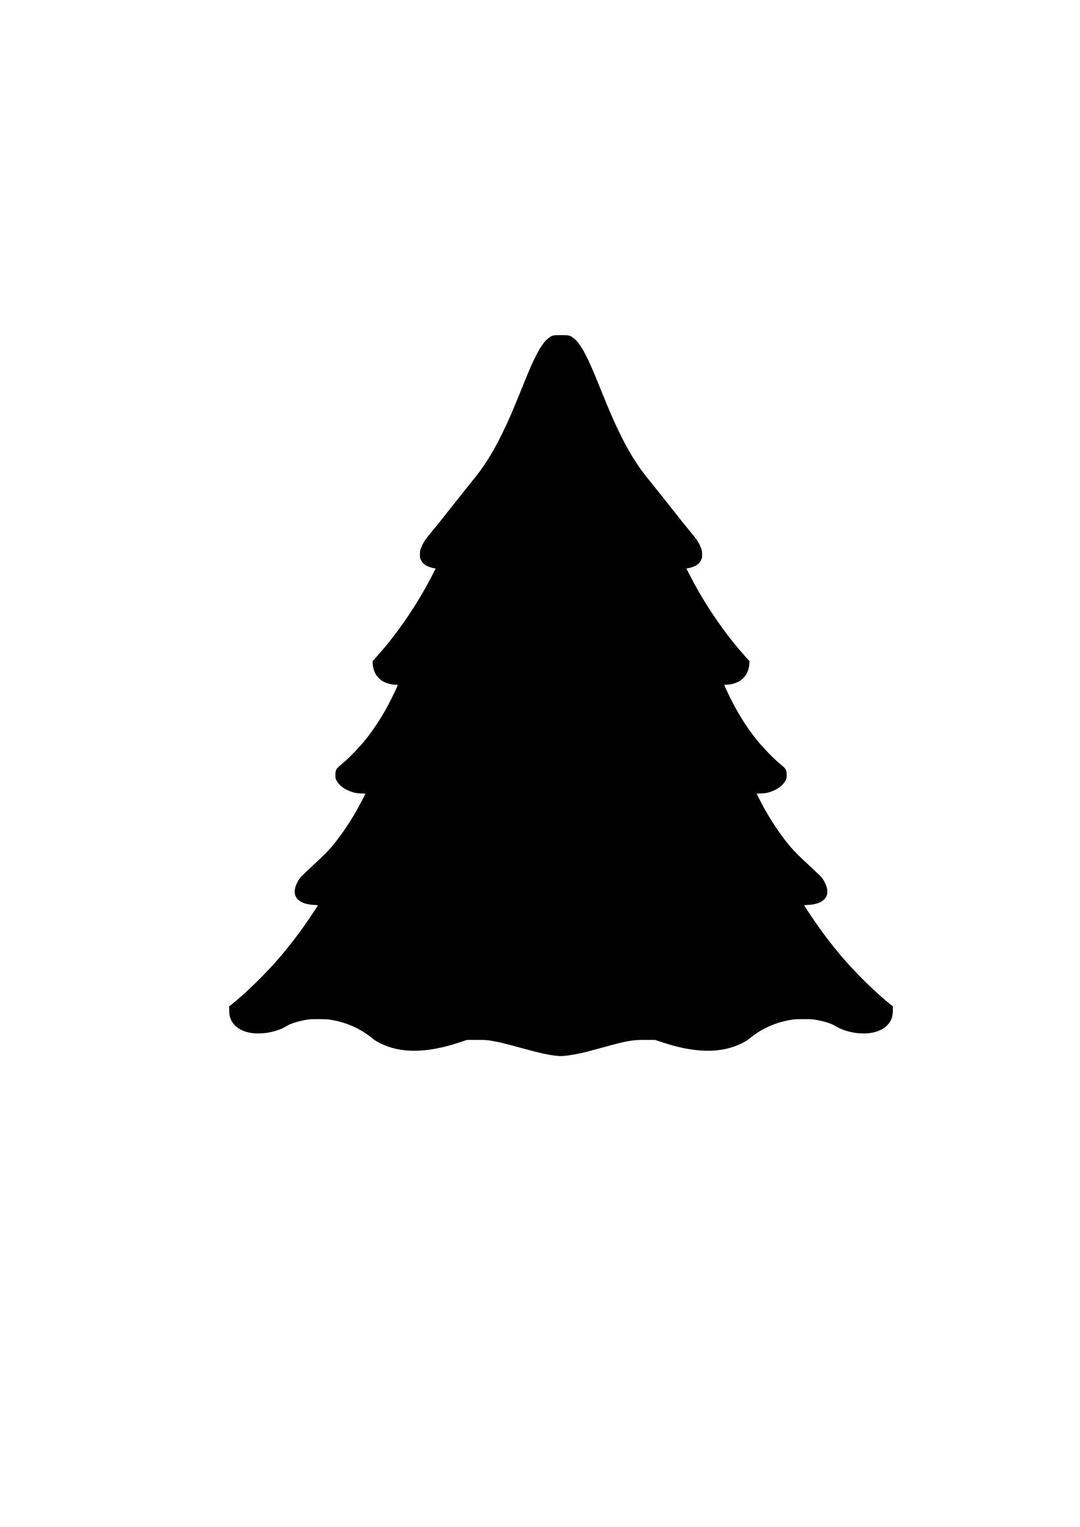 Evergreen Tree Silhouette png transparent